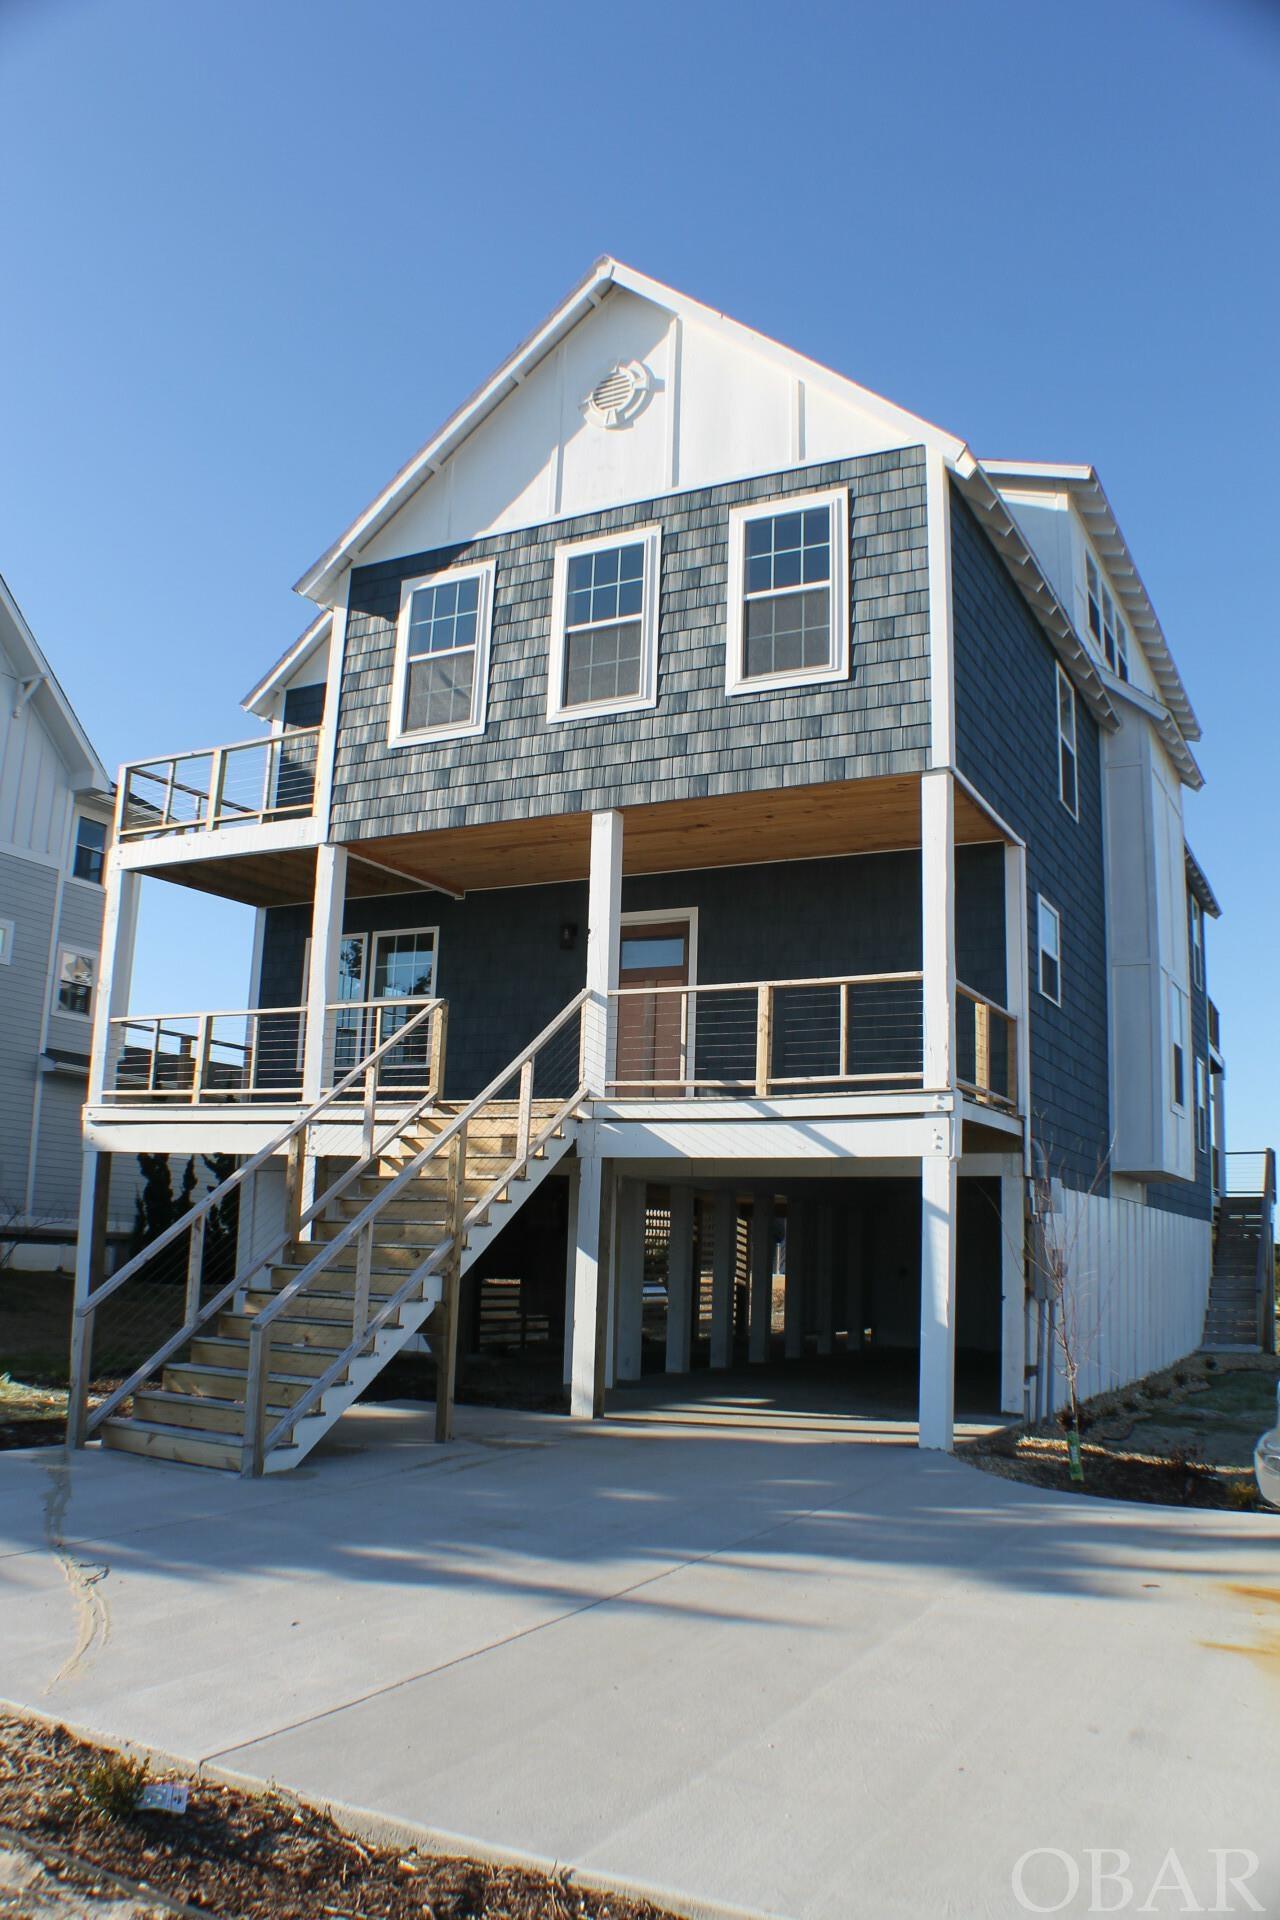 This sound-front home will make the perfect full time, vacation home, or rental property for any buyer. Built in 2022, it is ready for use. Pick out some paint colors to make it your own and start enjoying the Outer Banks first hand. This home boasts, brand new stainless appliances, hardwood floors throughout the entire home, tiled showers, 4 balconies and porches, 3 bedrooms, 3 bonus rooms, a massive lot of 28,500 sqft, and sound front access right in your backyard. The best part, is the water views from EVERY SINGLE ROOM. Approved for inground pool and dock.